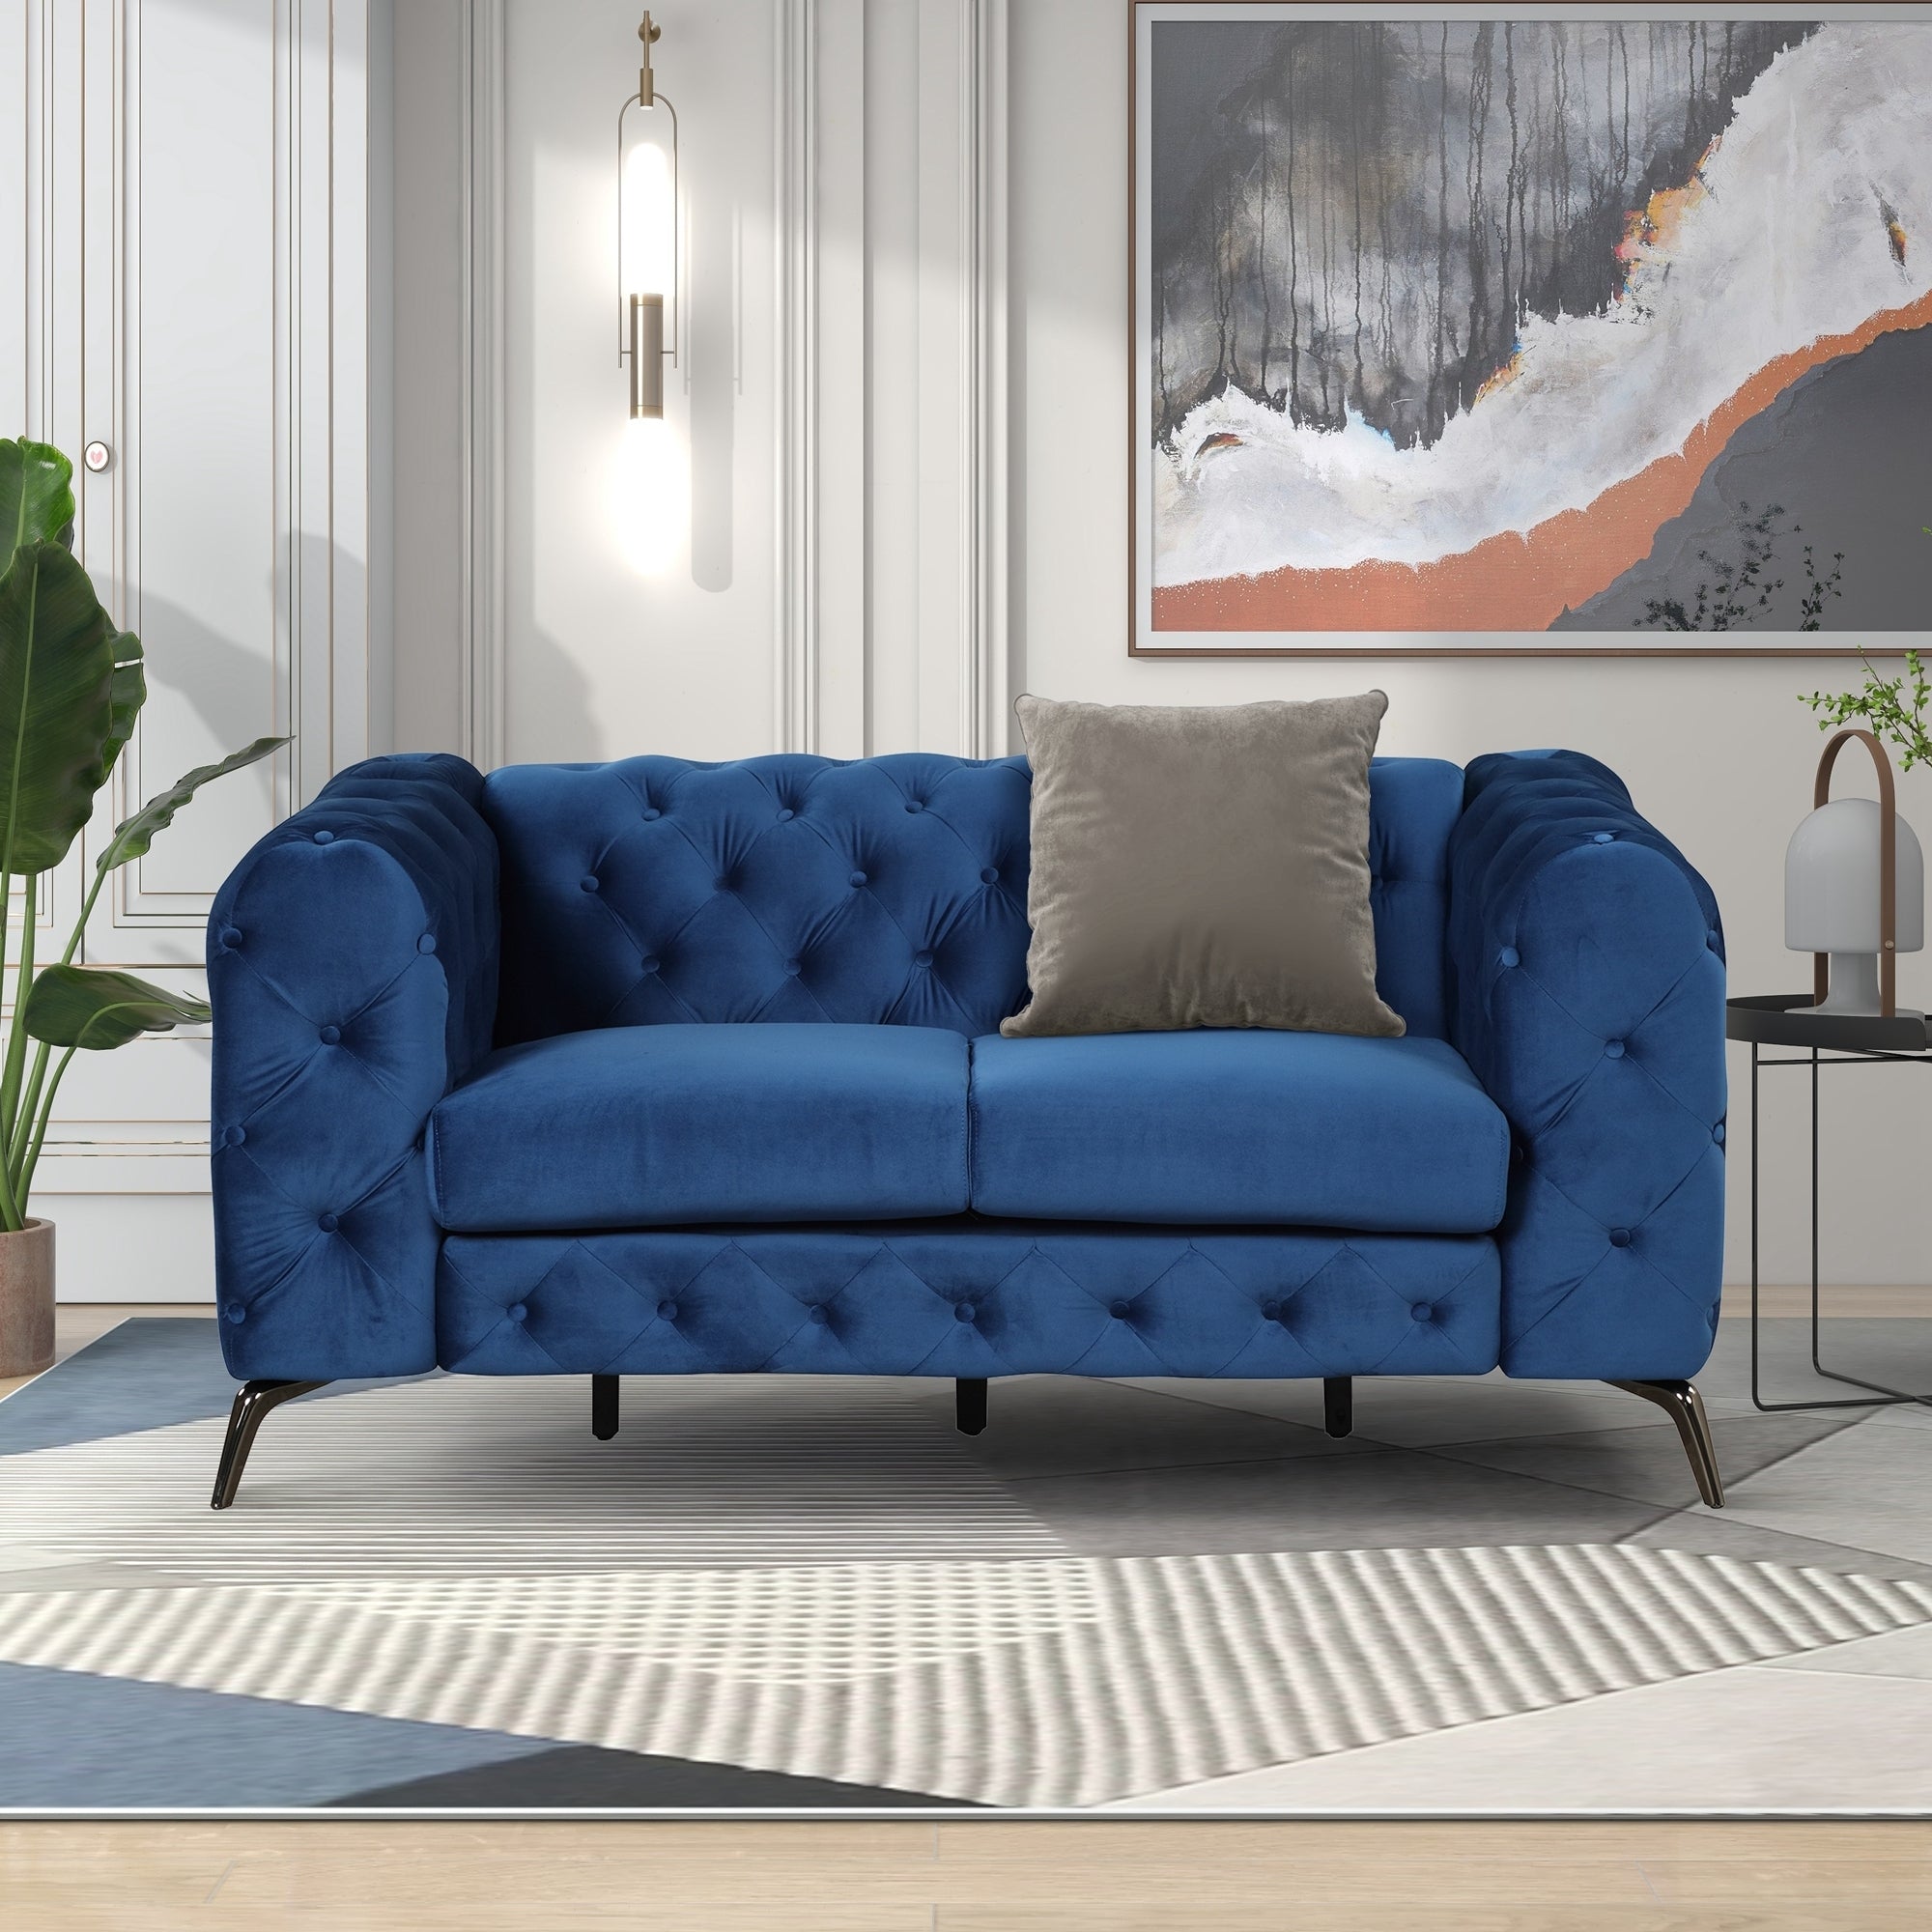 Modern 3-Piece Sofa Sets with Sturdy Metal Legs,Velvet Upholstered Couches Sets Including Three Seat Sofa, Loveseat and Single Chair for Living Room Furniture Set,Blue